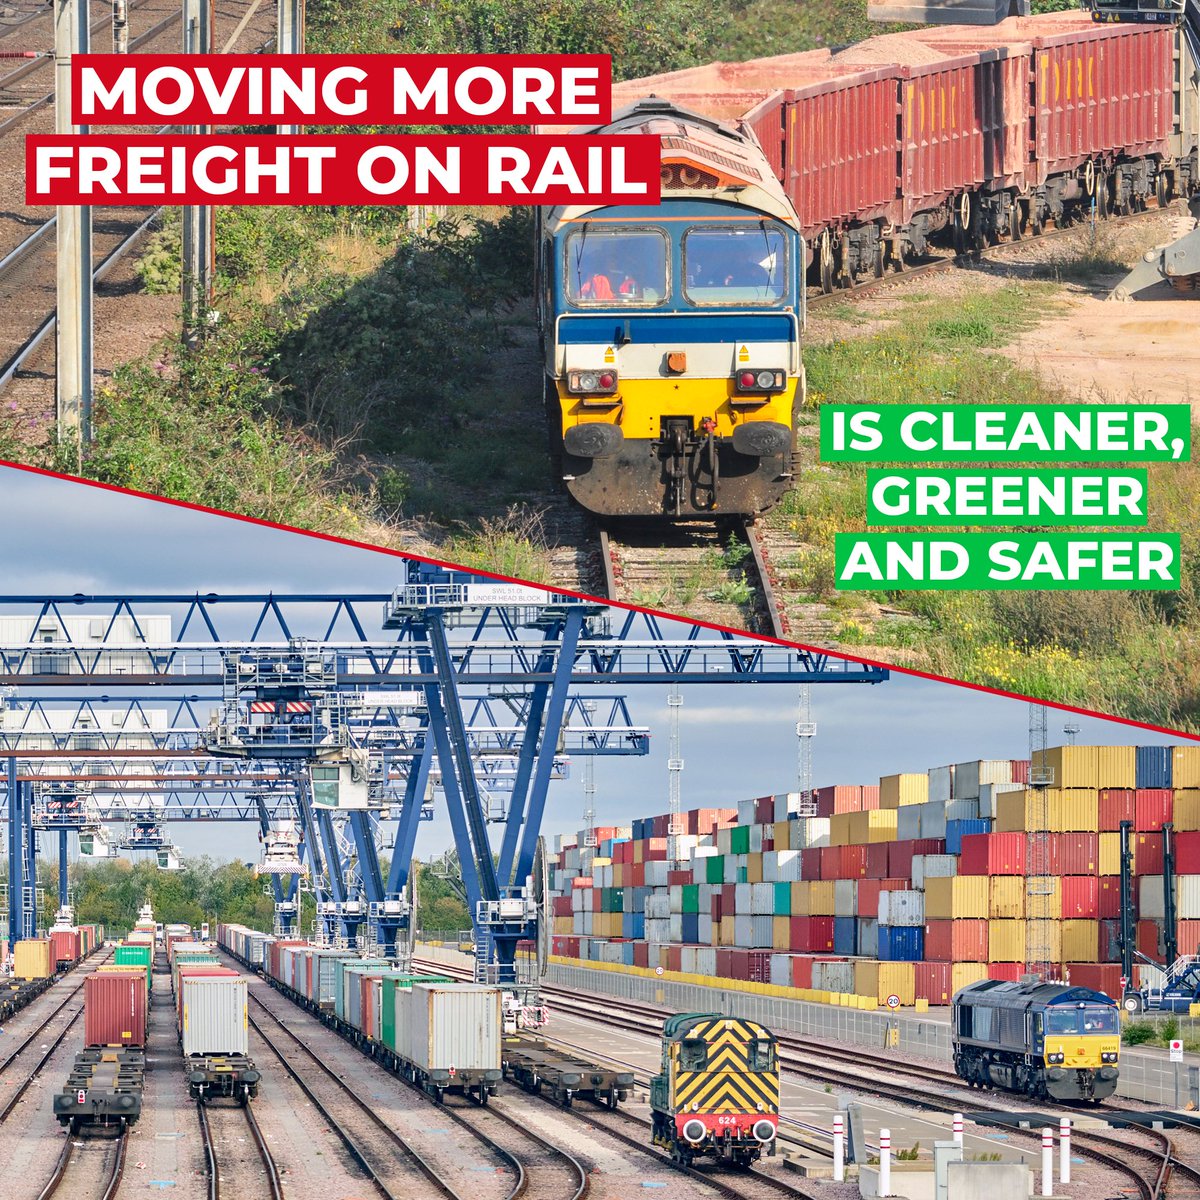 Our rail freight sector is a key part of the railway - helping to move goods, parts and equipment around the country. Labour's long-term plan will include support to move more freight by rail.